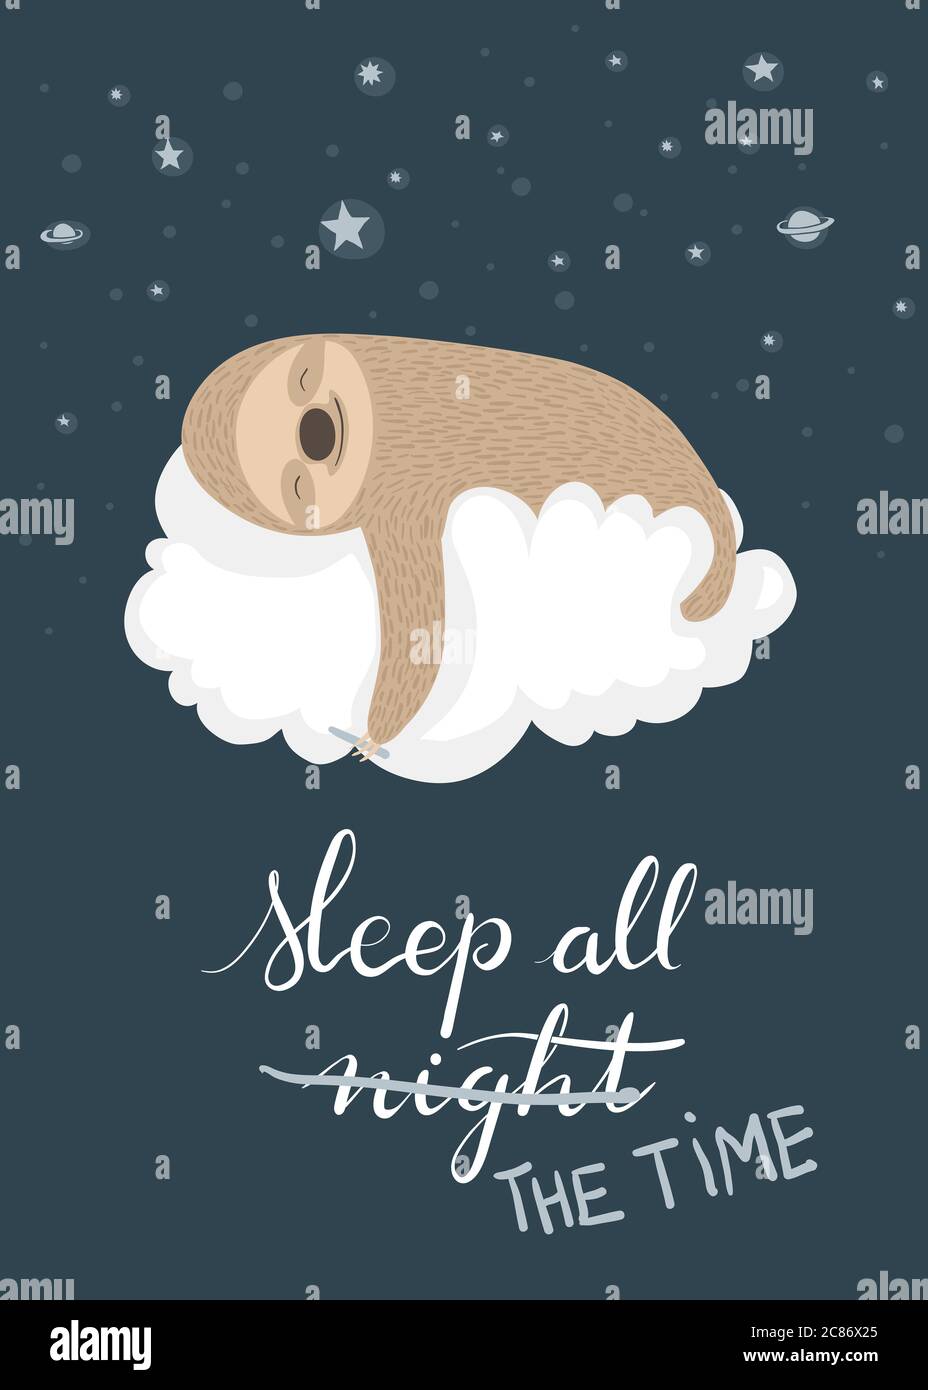 Cute cartoon sloth sleeping on a cloud holding a crayon with handlettered Sleep all night / All the time text. Suitable for t-shirt or poster design. Stock Photo